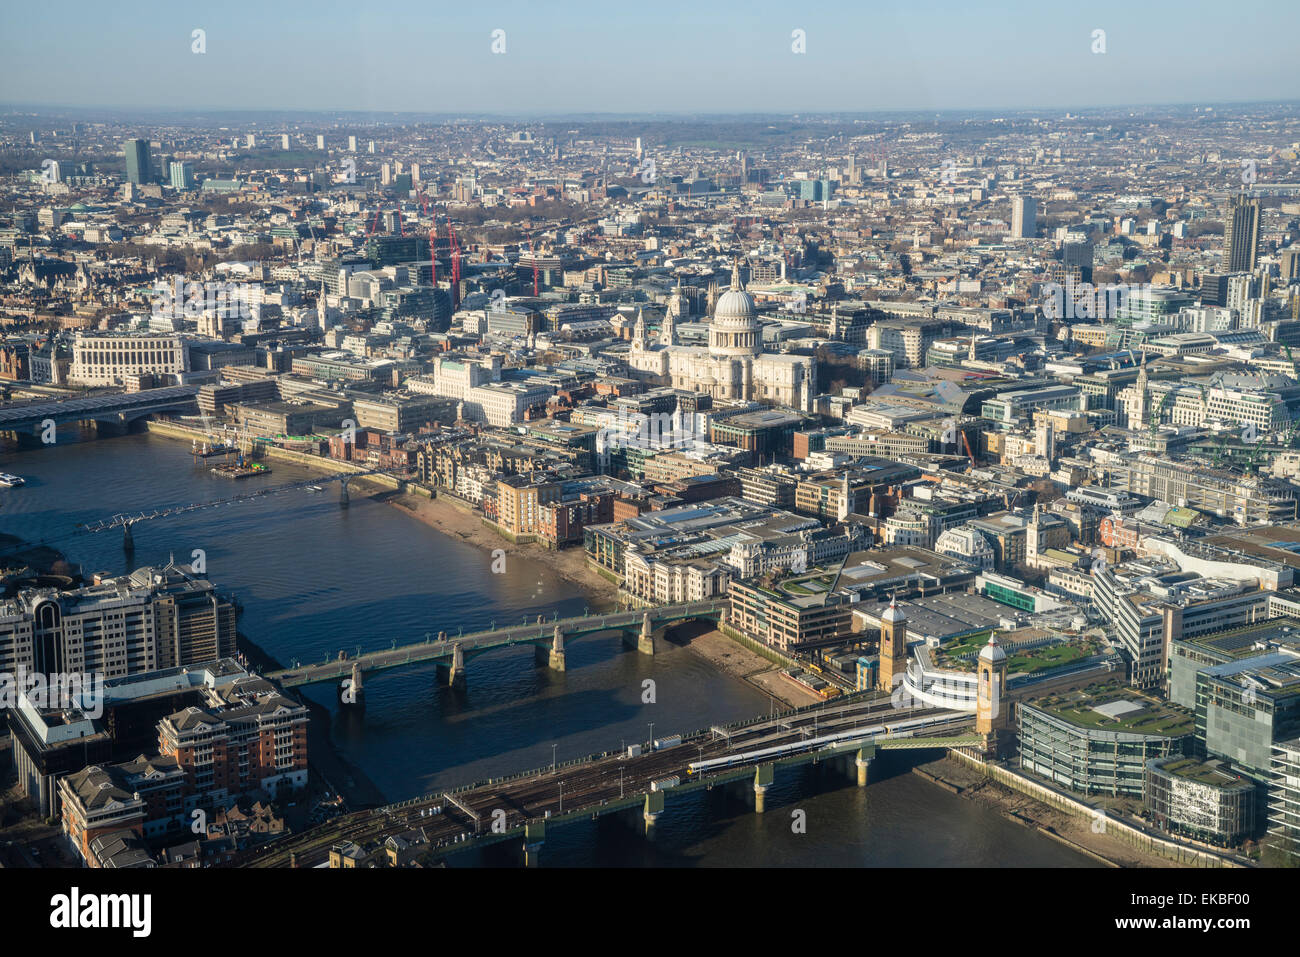 Elevated view of the River Thames and London skyline looking West, London, England, United Kingdom, Europe Stock Photo